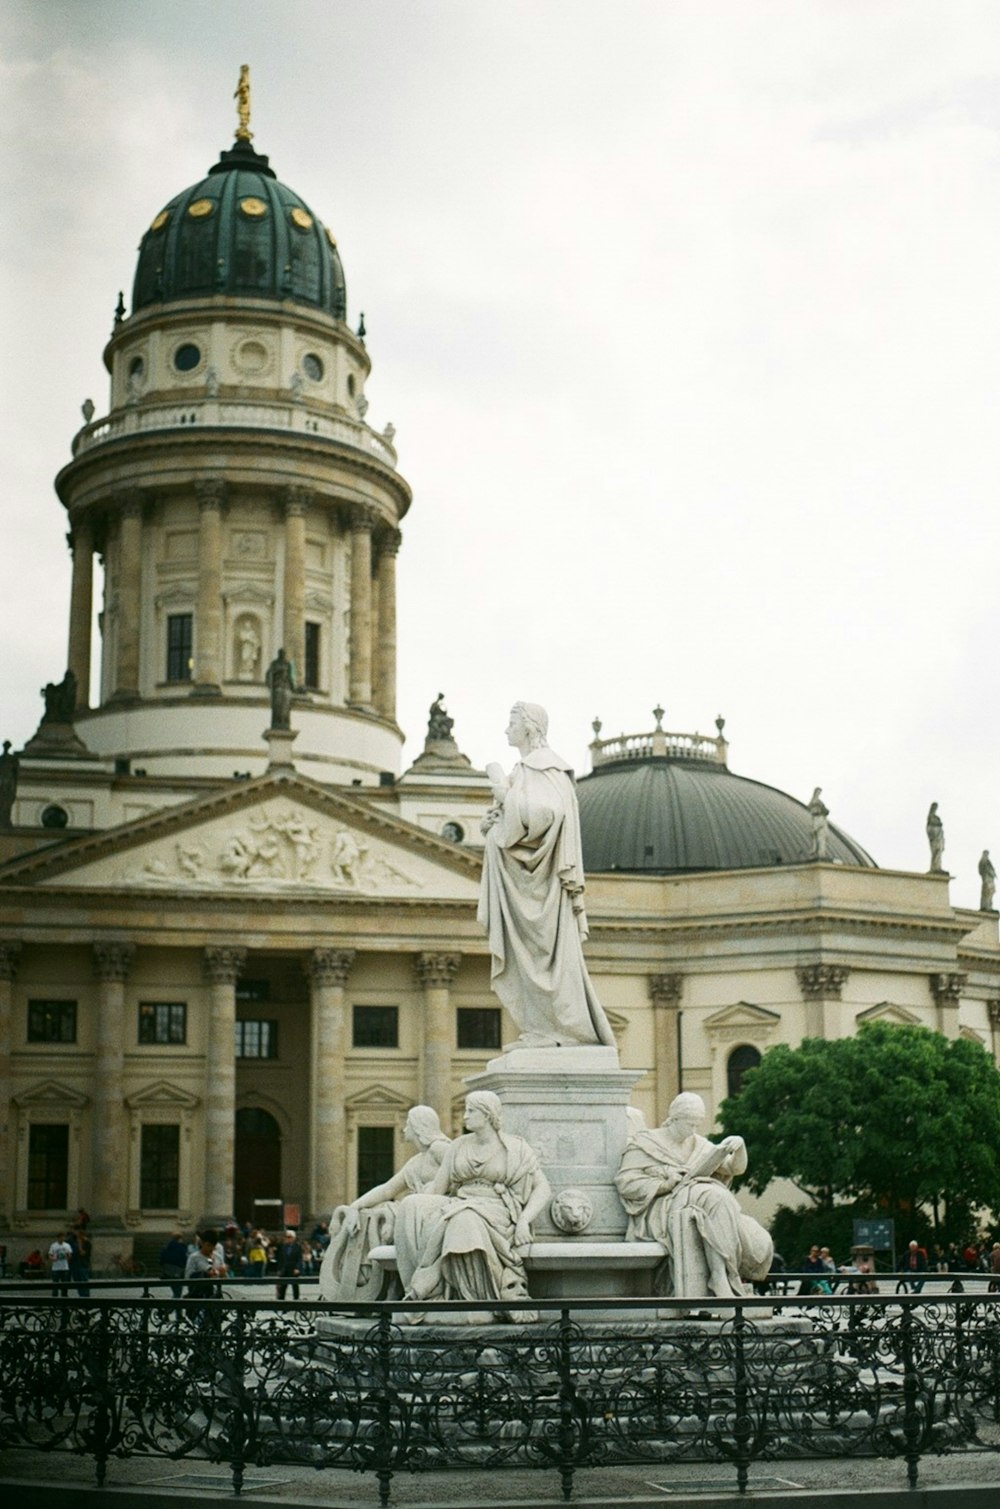 a large building with a statue in front of it